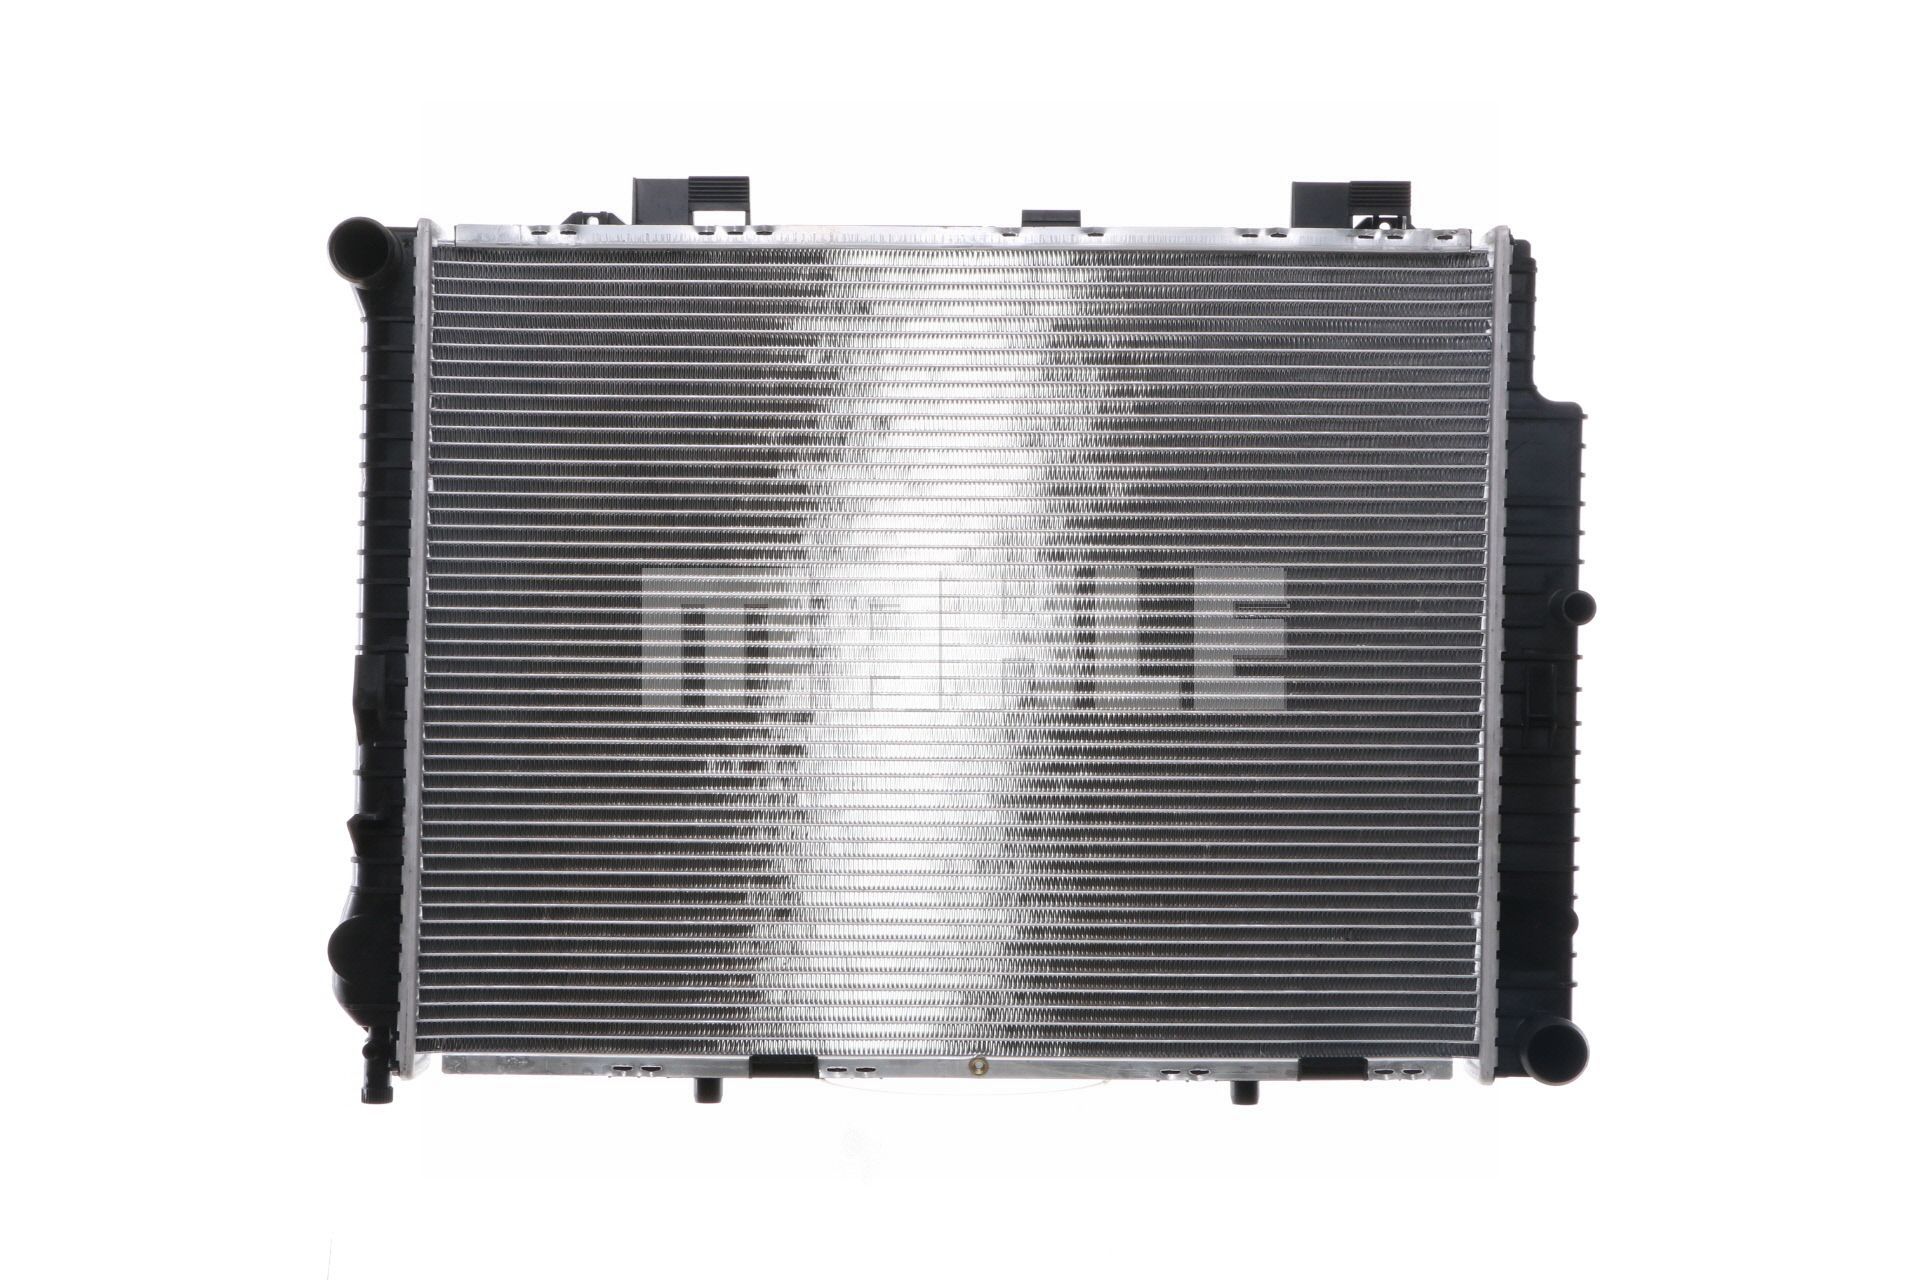 MAHLE ORIGINAL CR 309 000S Engine radiator for vehicles with/without air conditioning, 641 x 488 x 42 mm, Manual Transmission, Brazed cooling fins